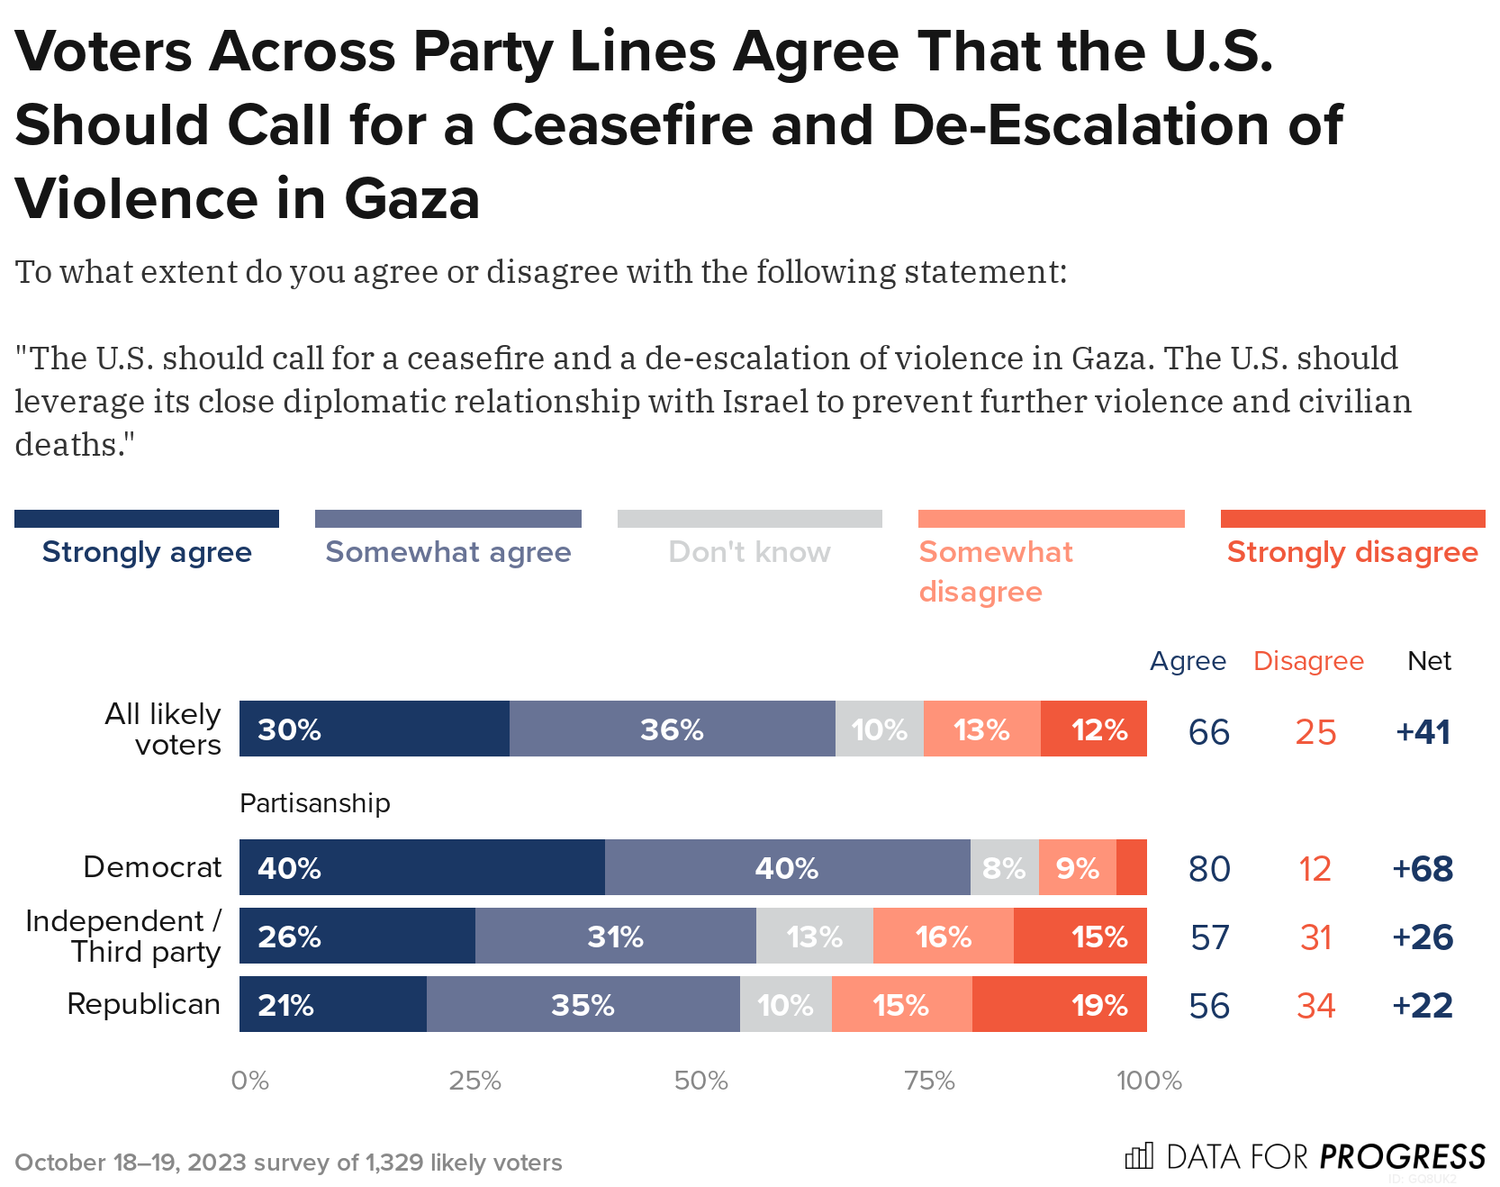 https://www.dataforprogress.org/blog/2023/10/19/voters-agree-the-us-should-call-for-a-ceasefire-and-de-escalation-of-violence-in-gaza